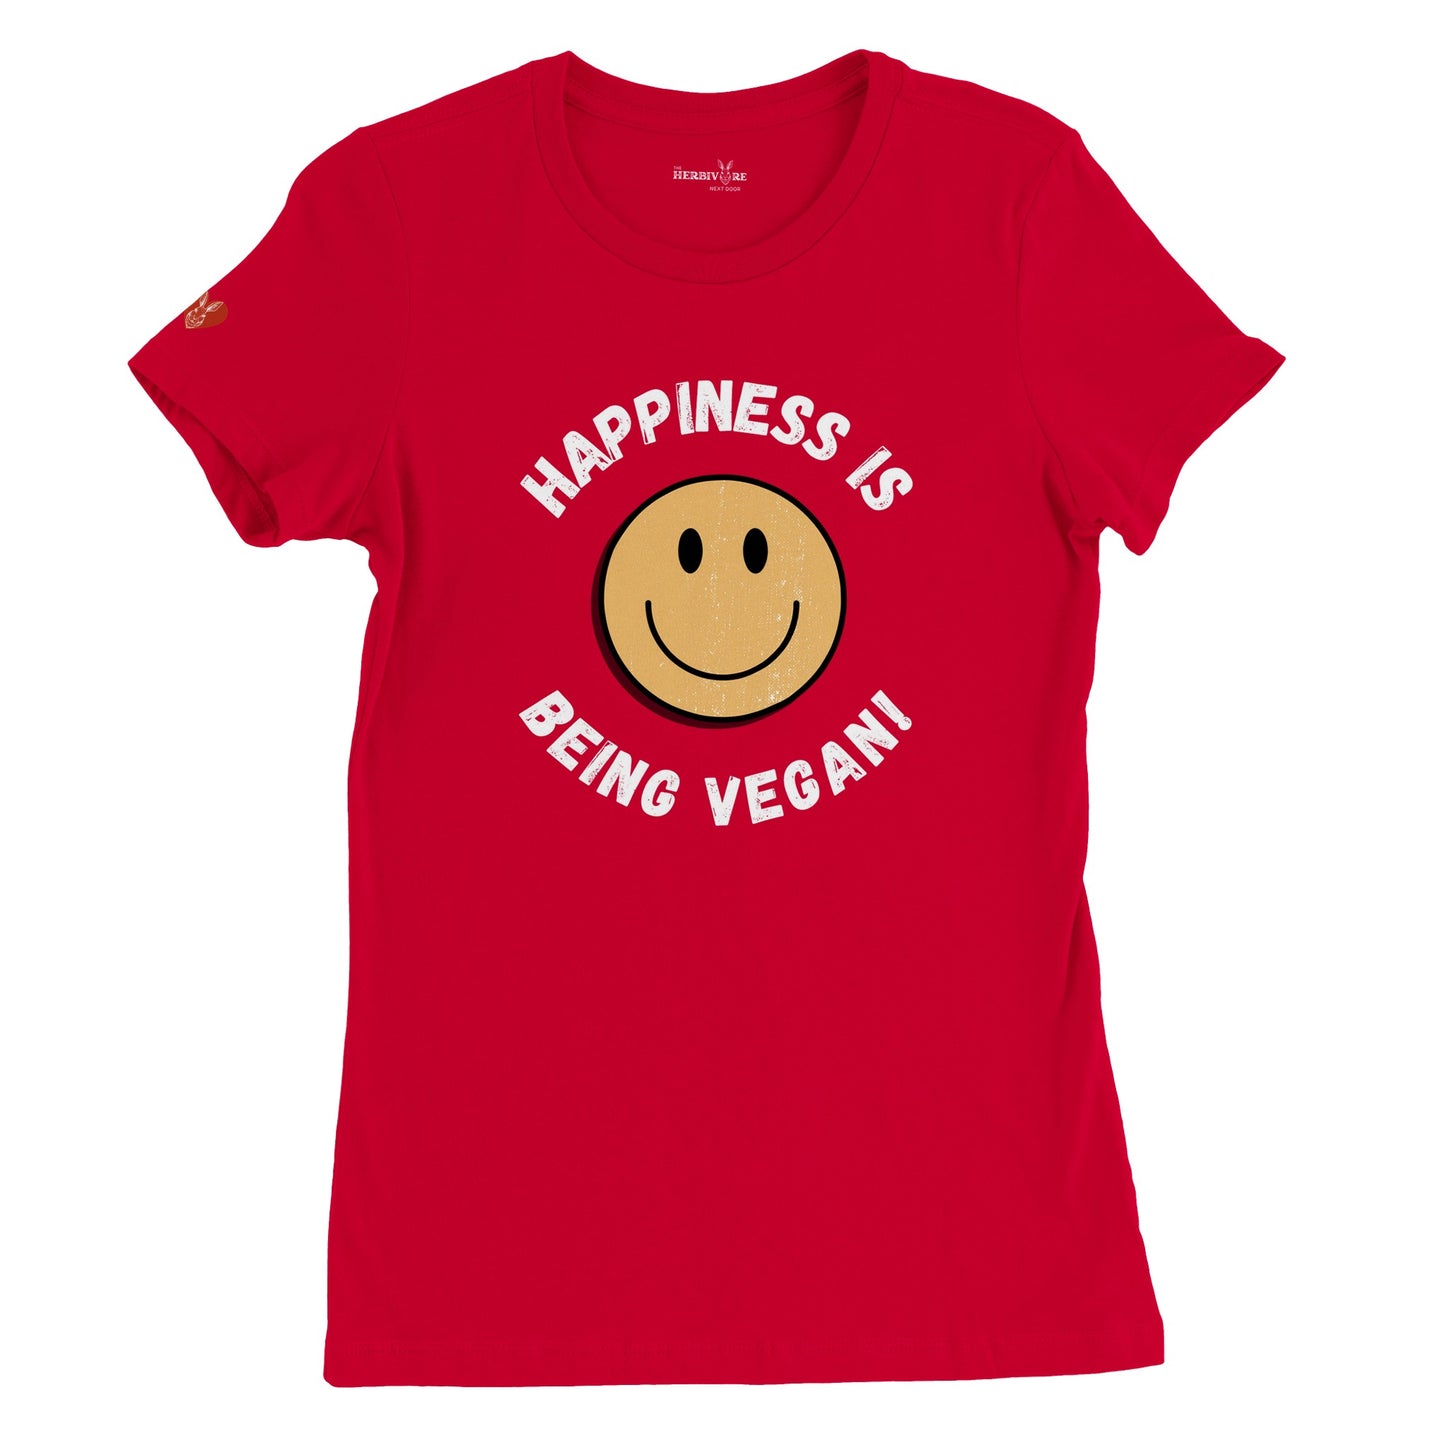 Happiness is - Women's Style (Women's run small - get one size up from normal unisex)